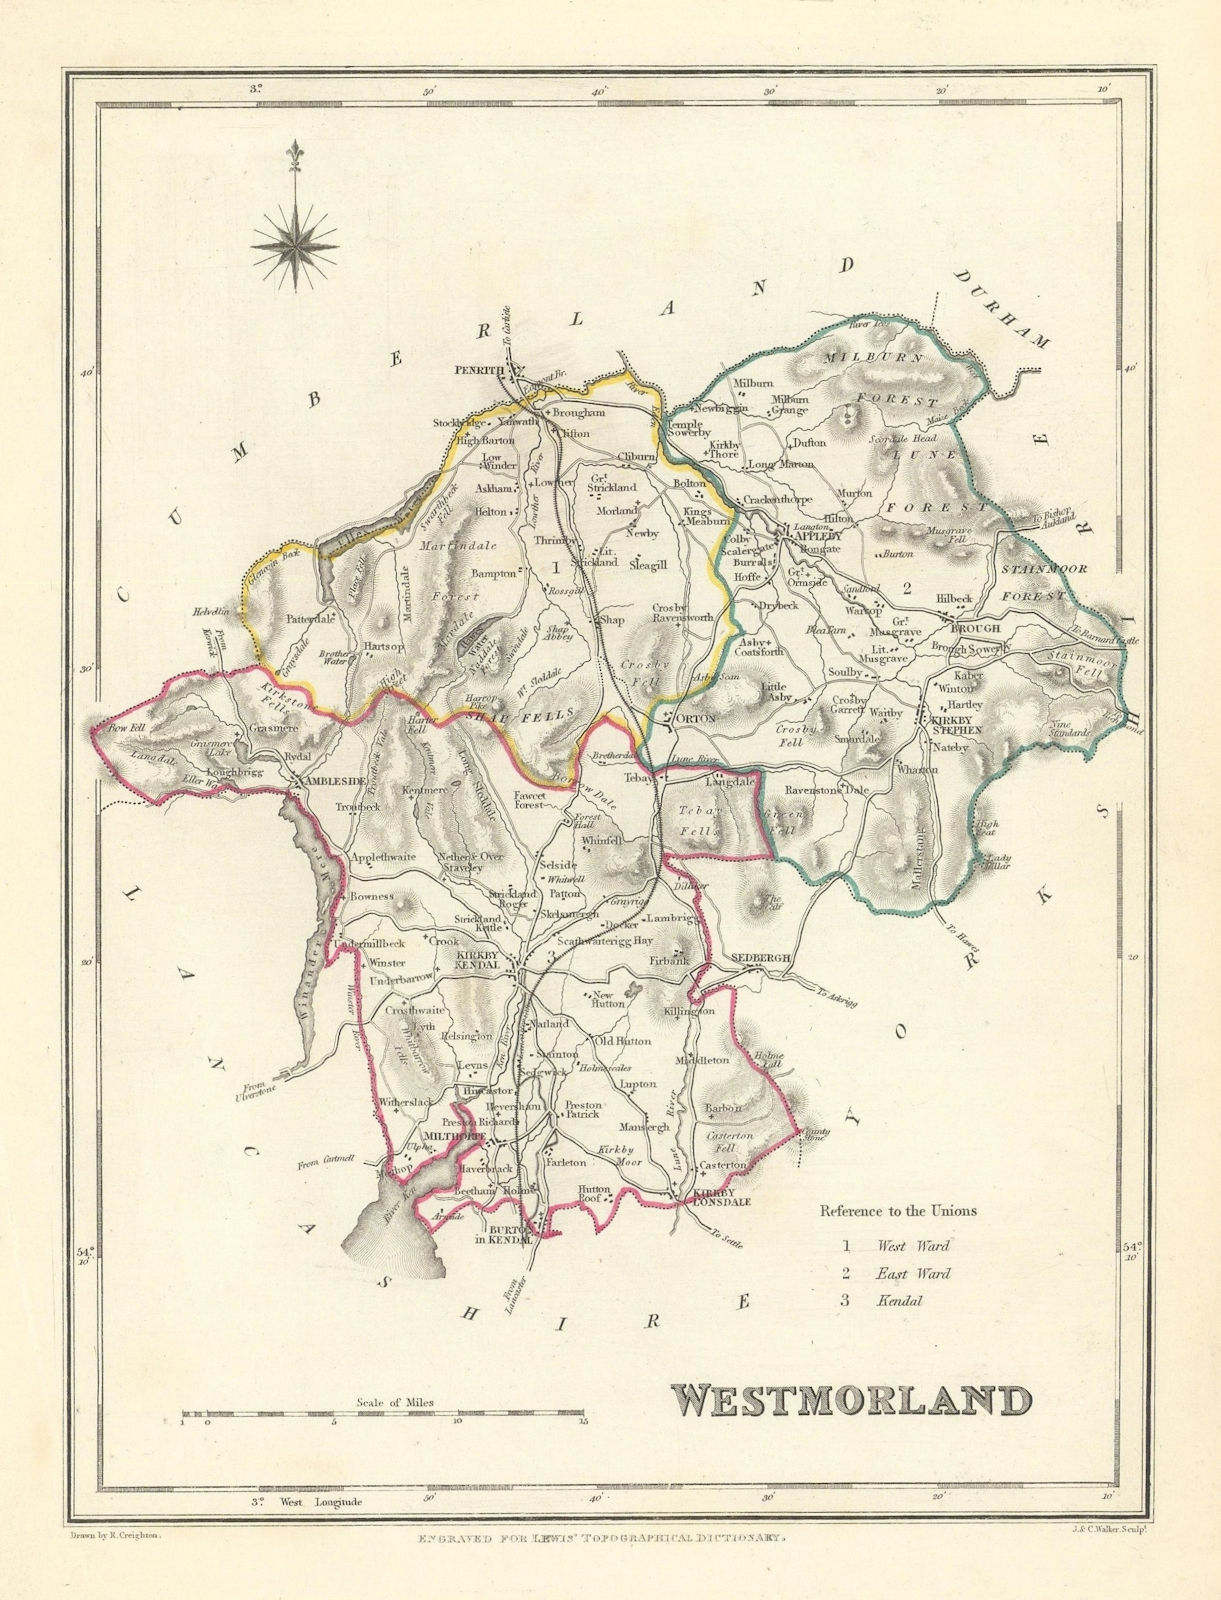 Antique county map of WESTMORLAND by Creighton Walker Lewis. Lake District c1840